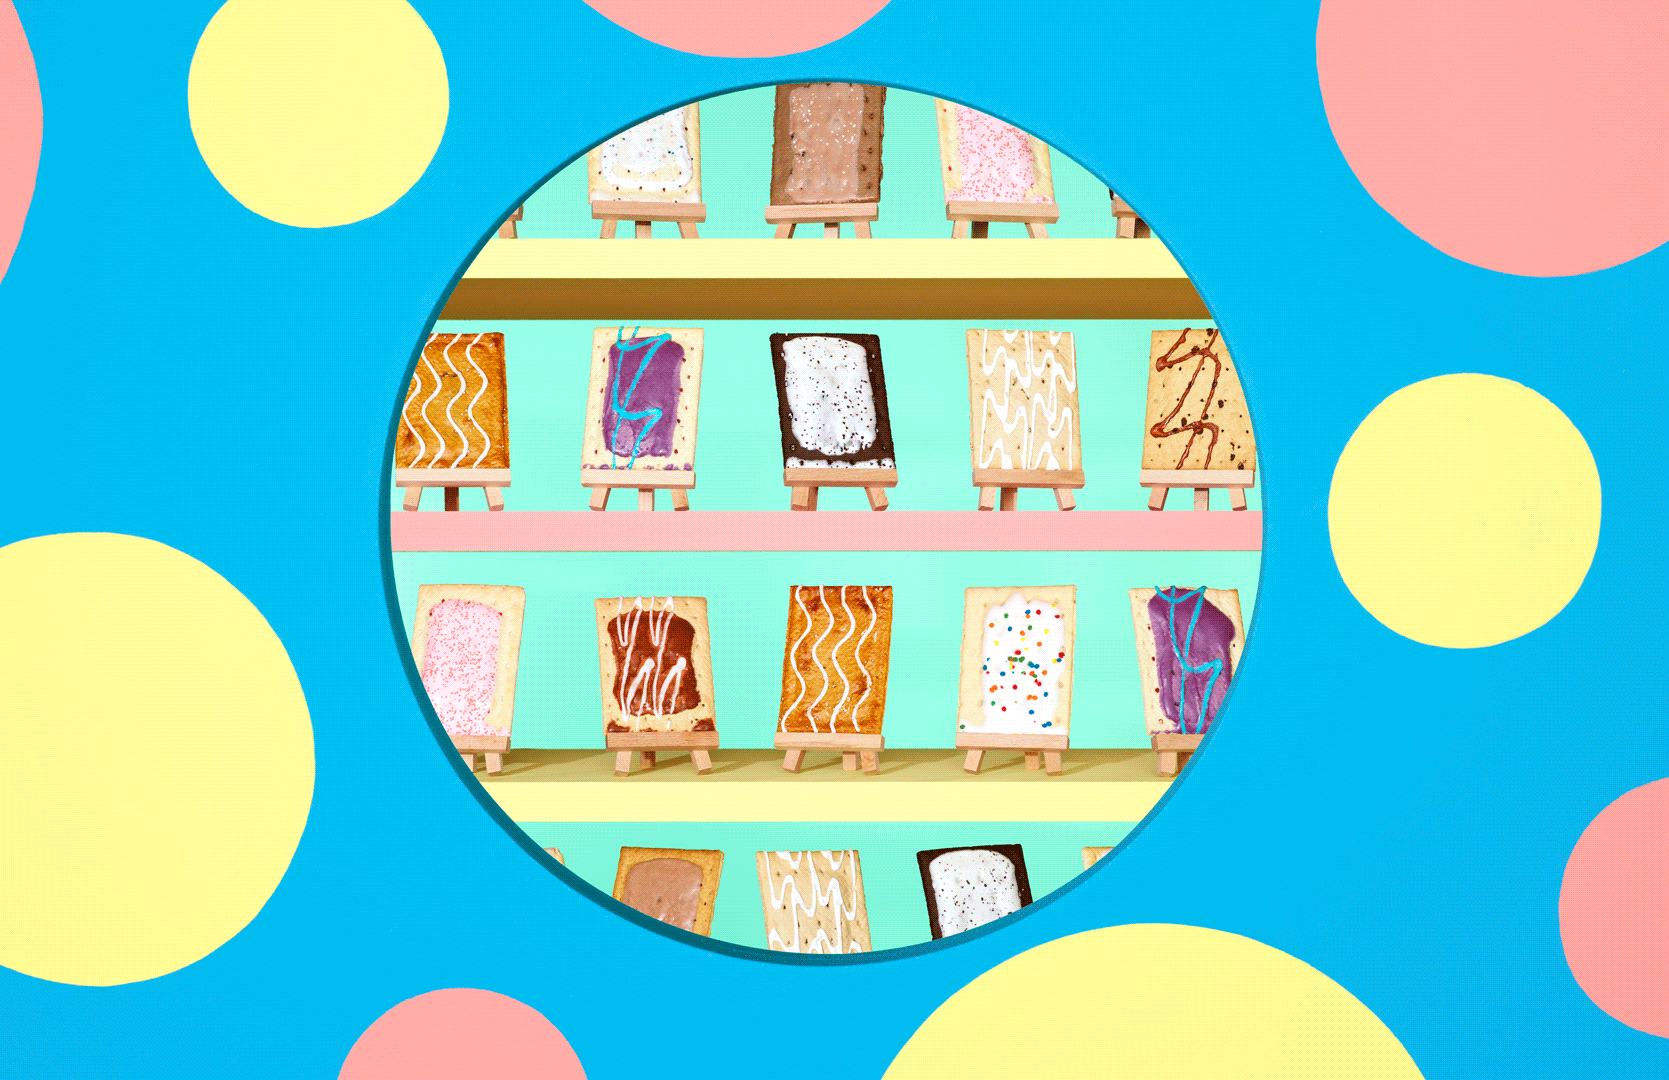 T2201_Pop_Tarts_Easal_Gif_Stacked_02_11x17_V3